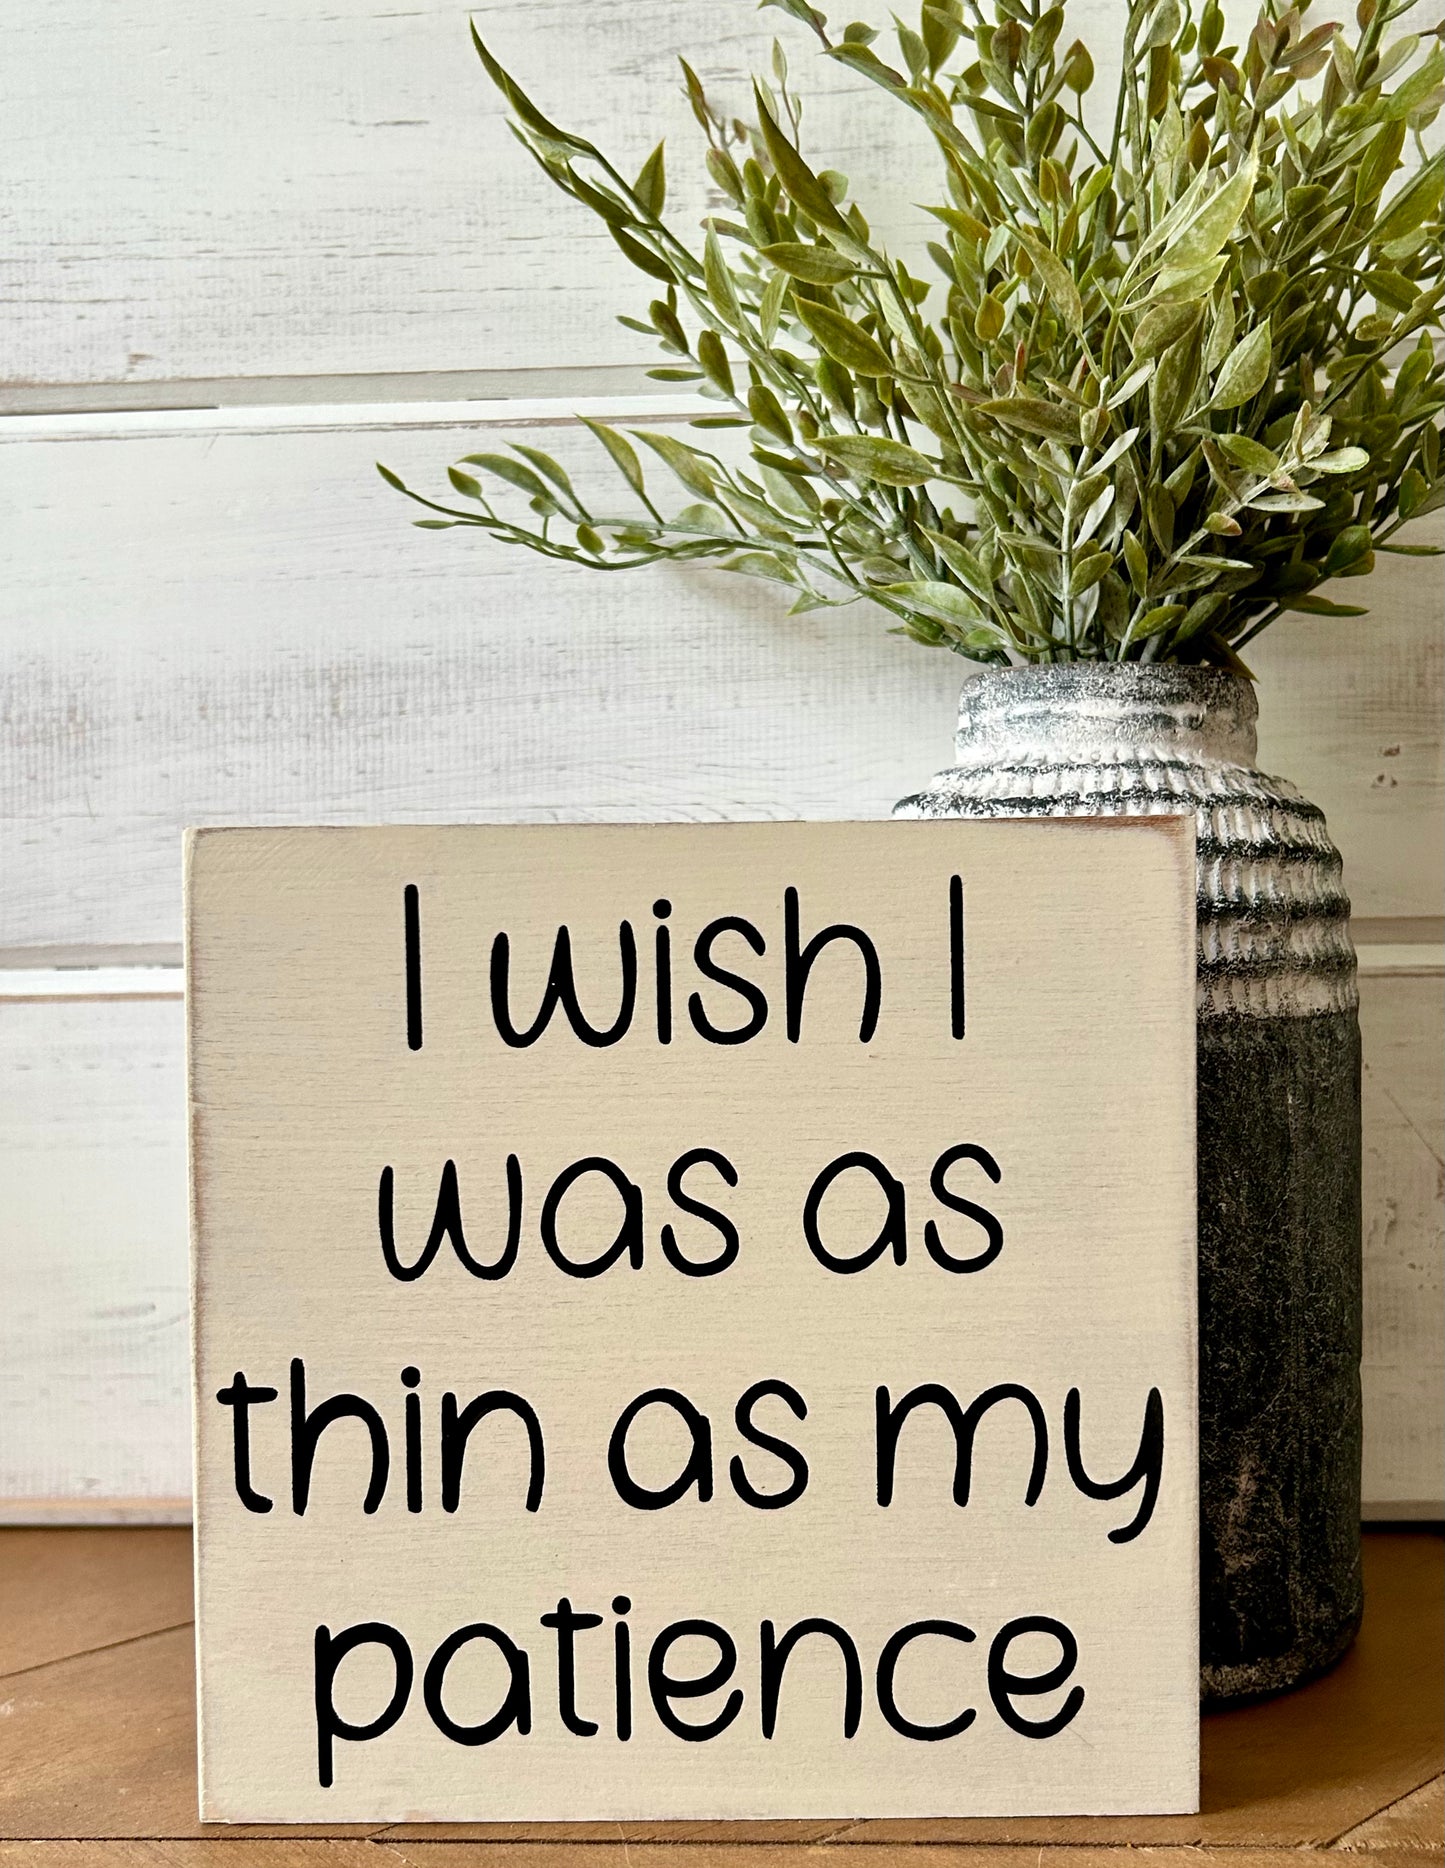 "Thin patience" funny wood sign